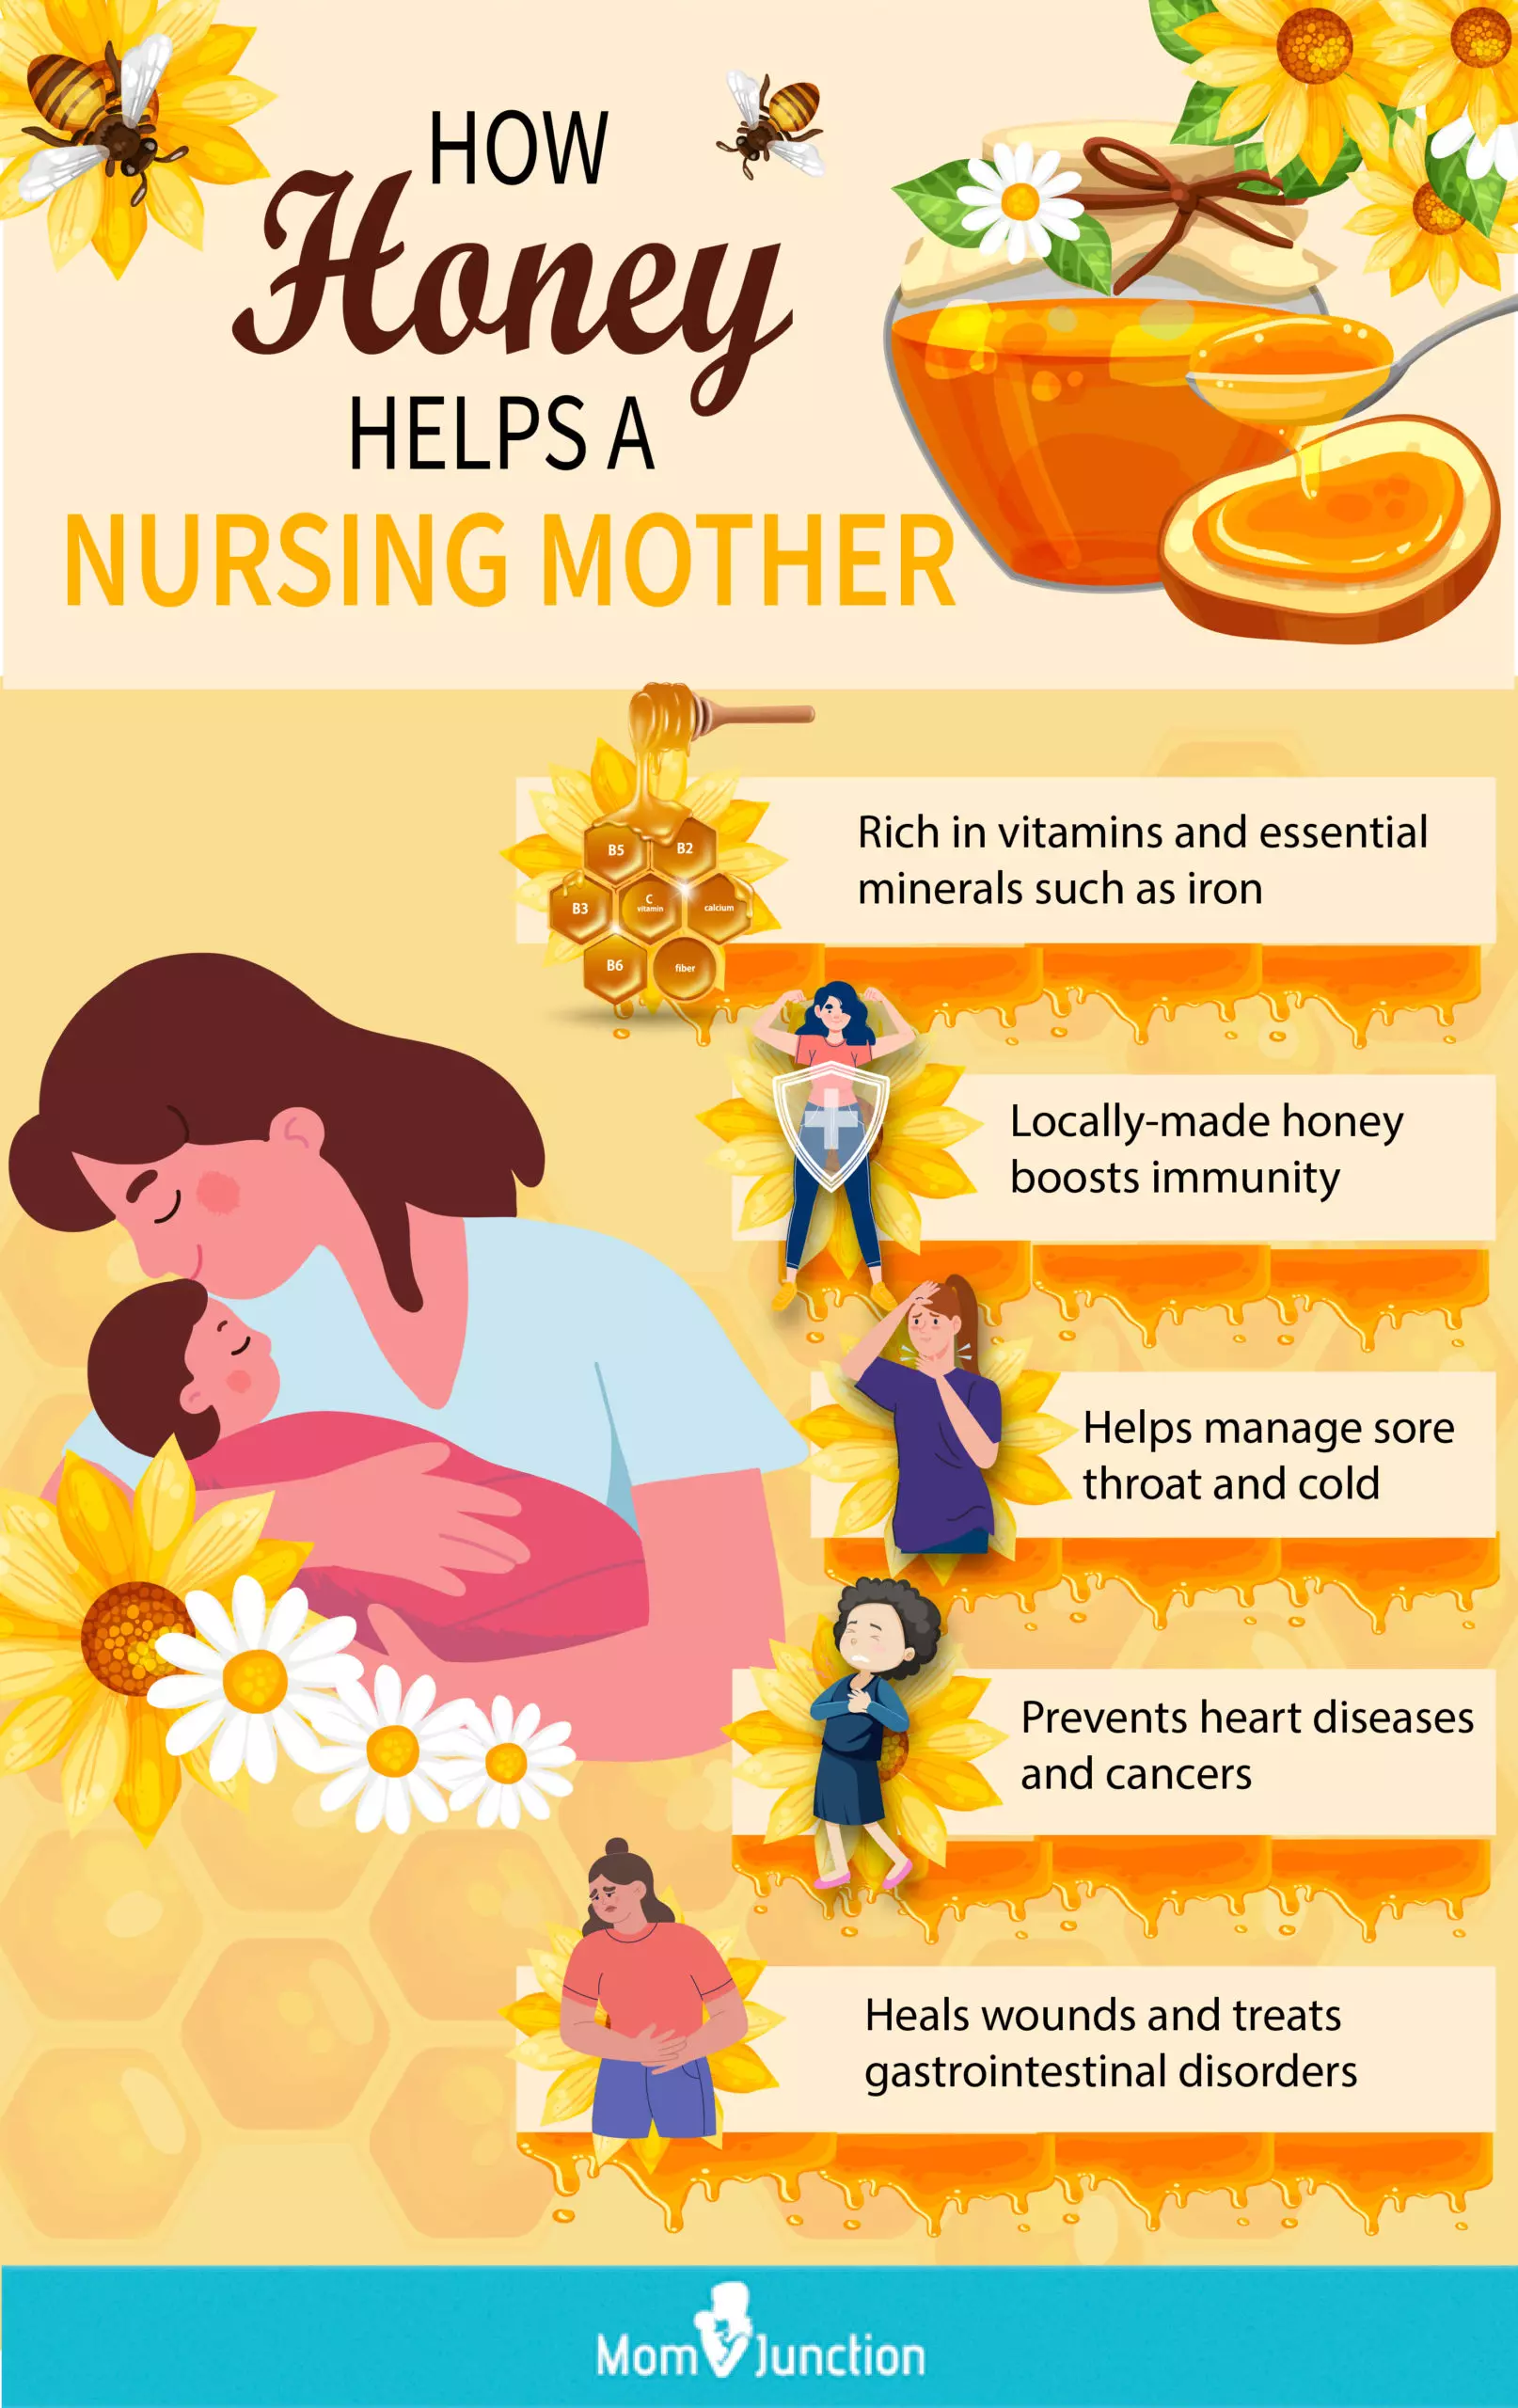 how honey helps a nursing mother (infographic)